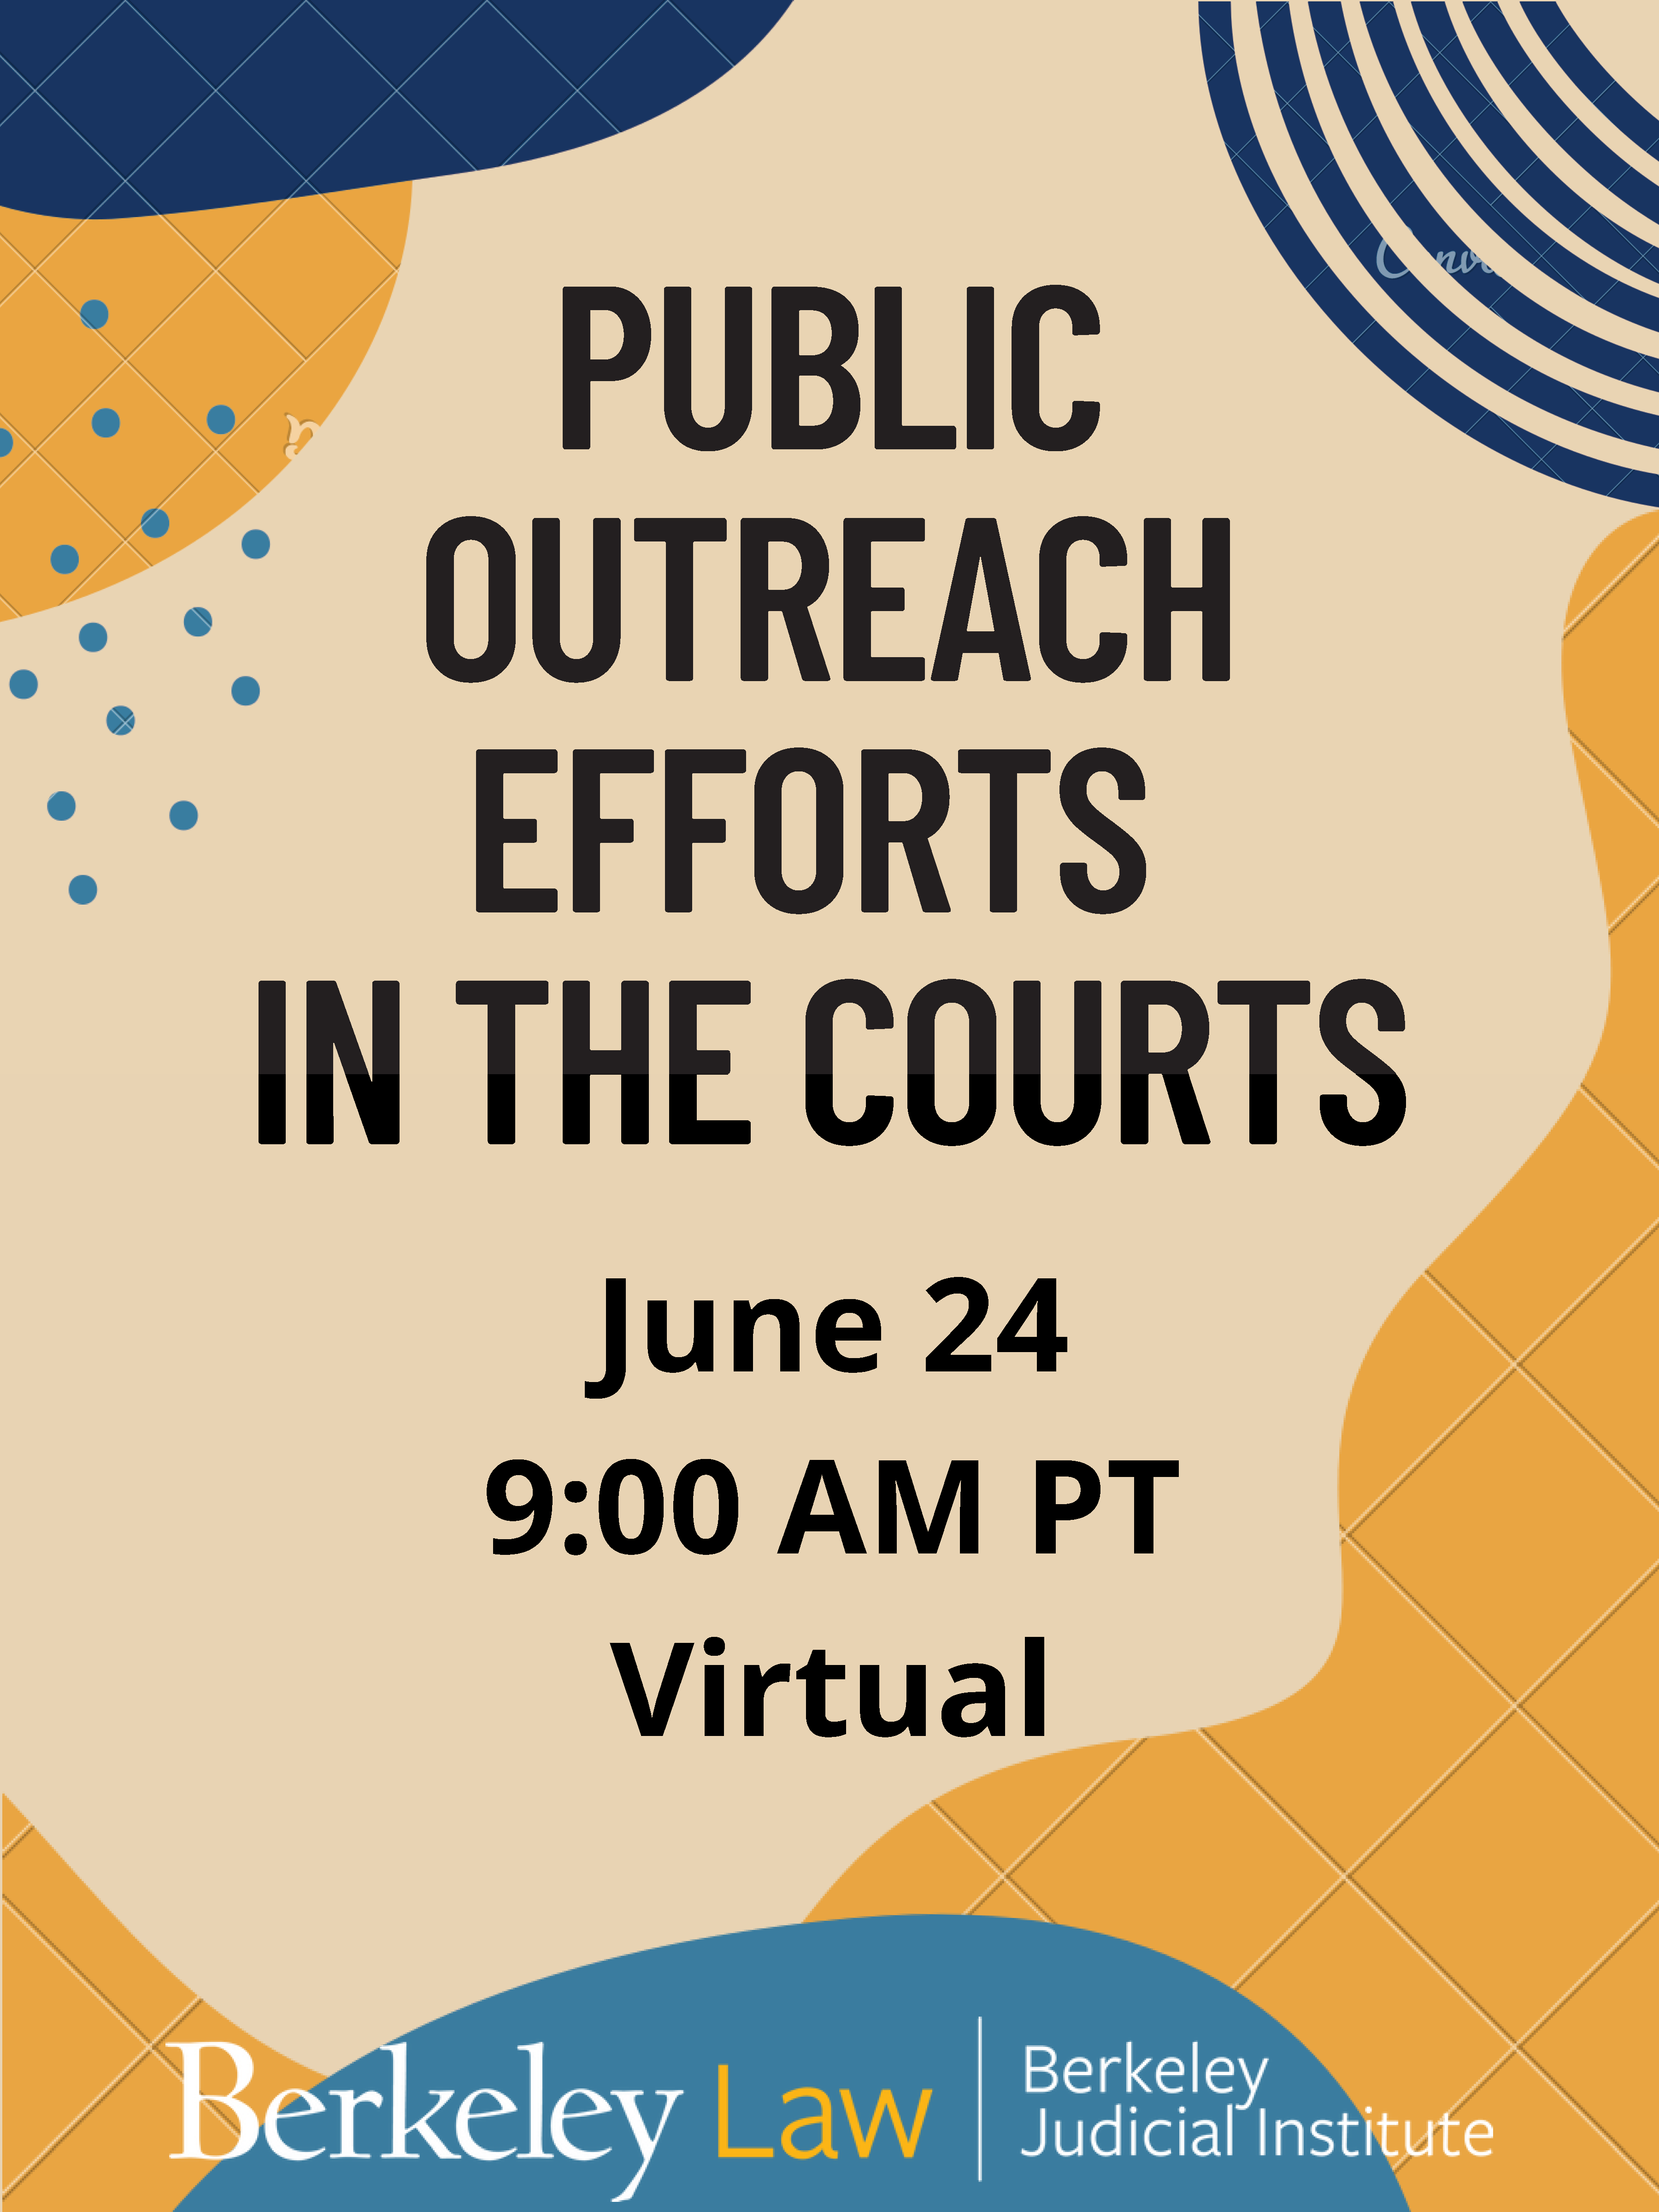 Public Outreach Efforts in the Courts flyer